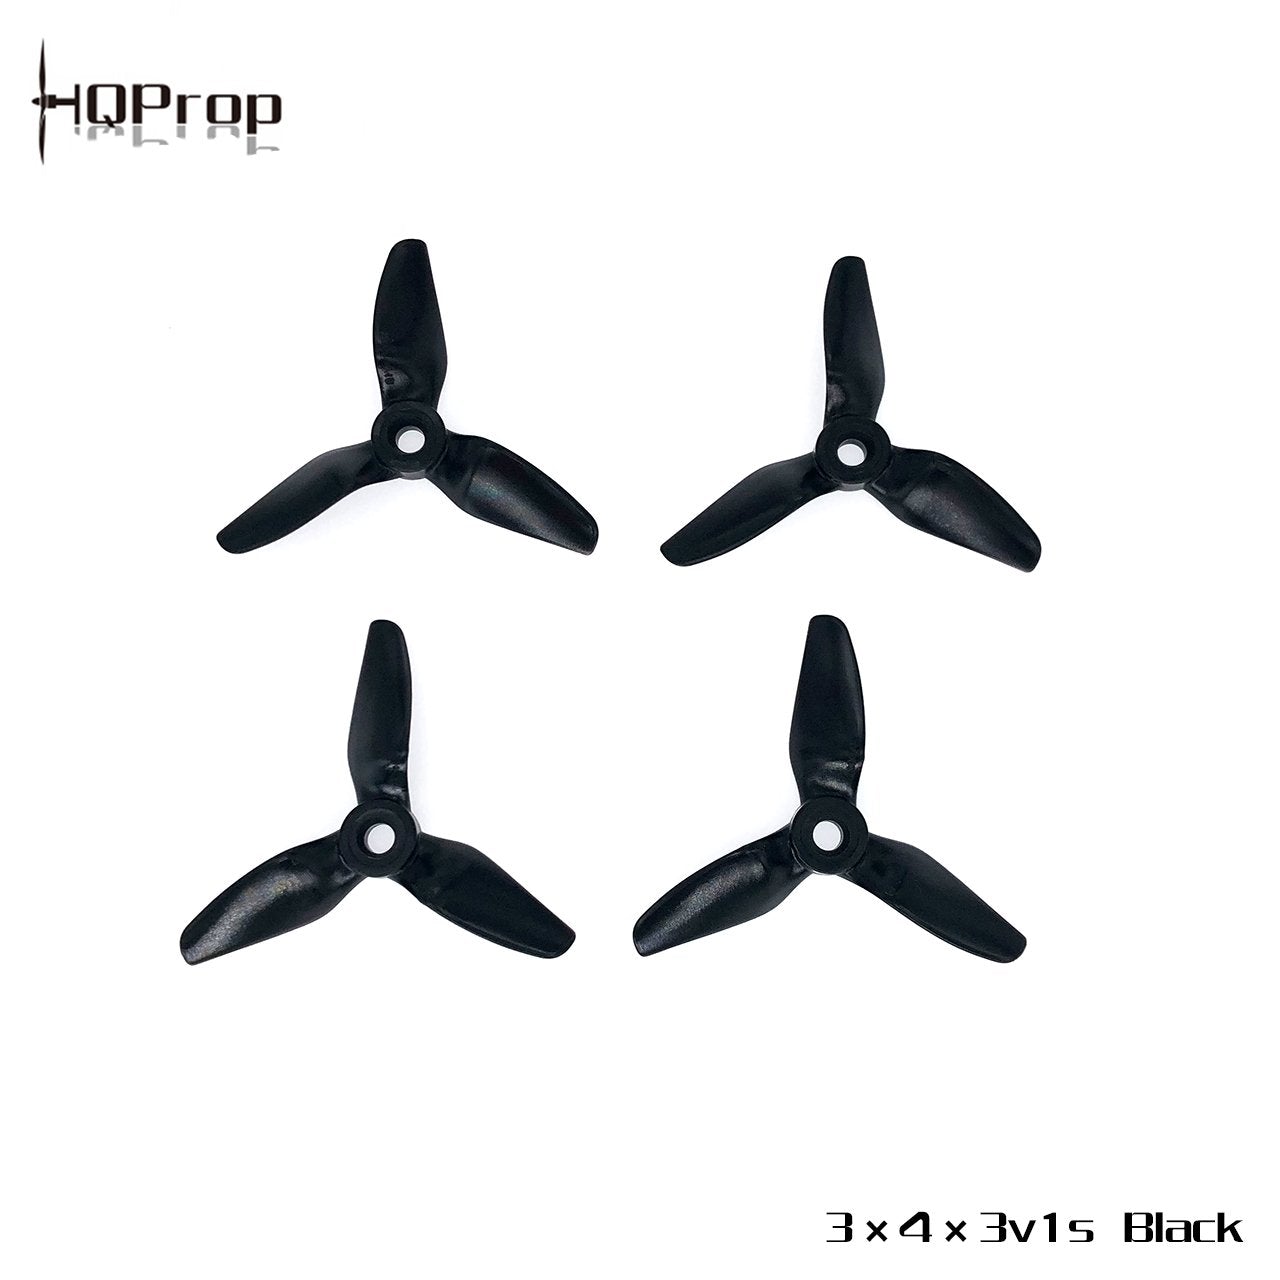 HQProp 3X4X3V1S Tri-Blade 3 inch Propellers 8 - HQProp - Drone Authority